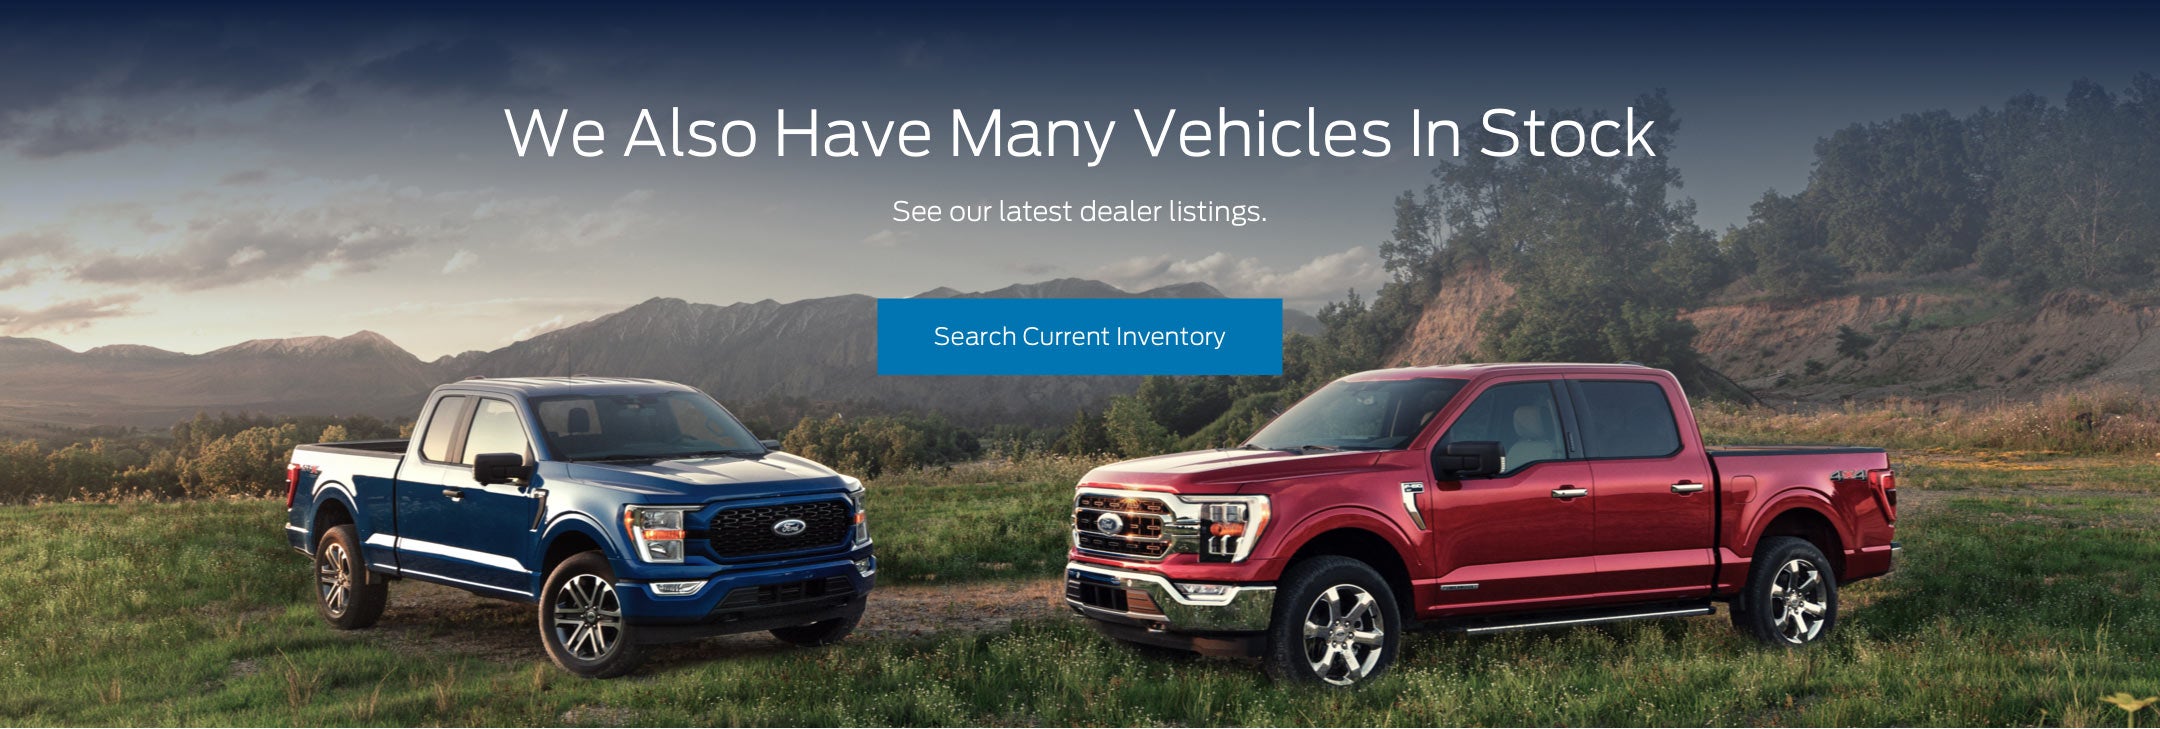 Ford vehicles in stock | Rush Truck Centers - Ceres in Ceres CA